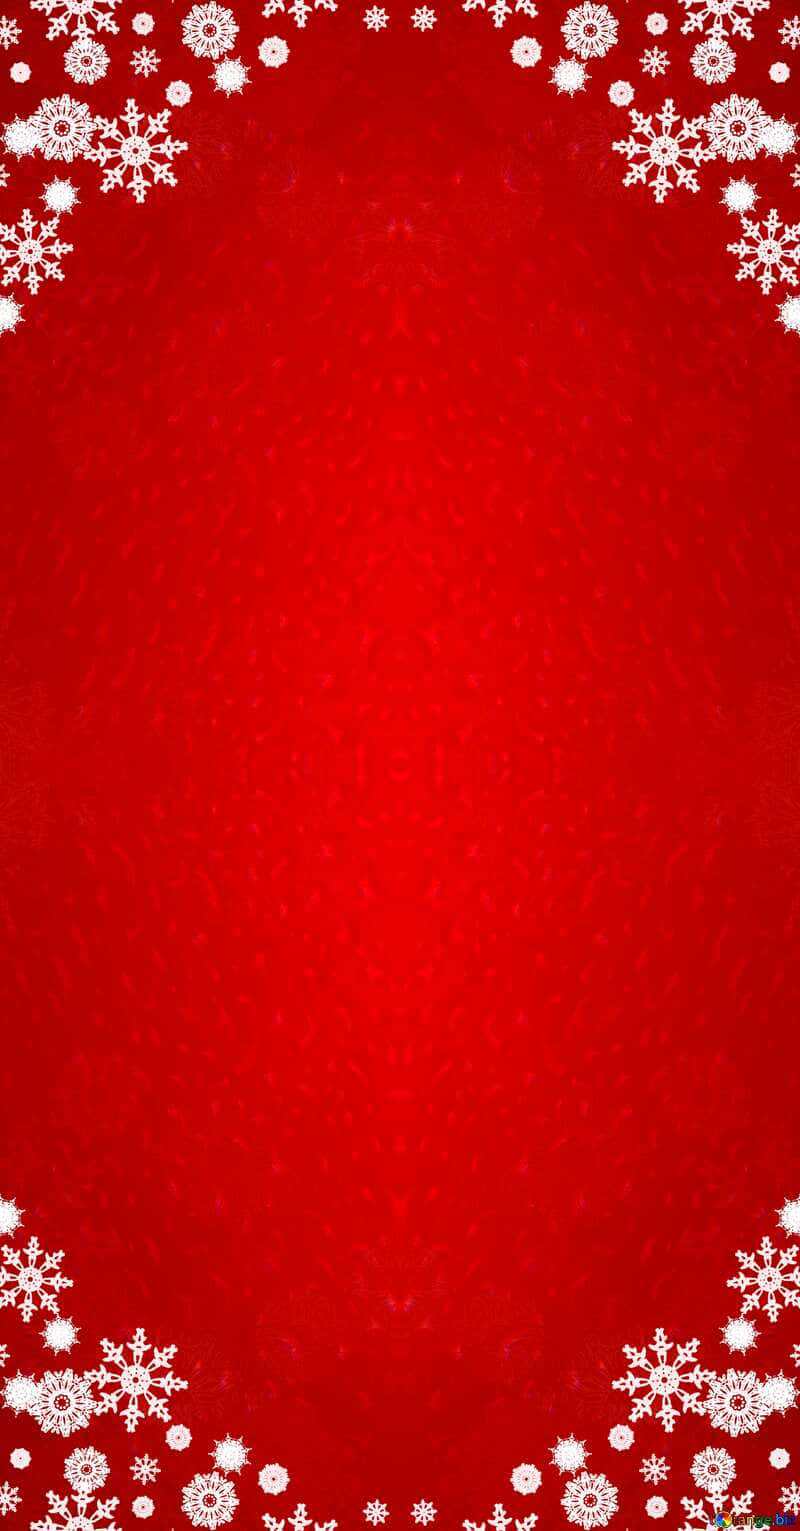 A Gorgeous Red Christmas Background